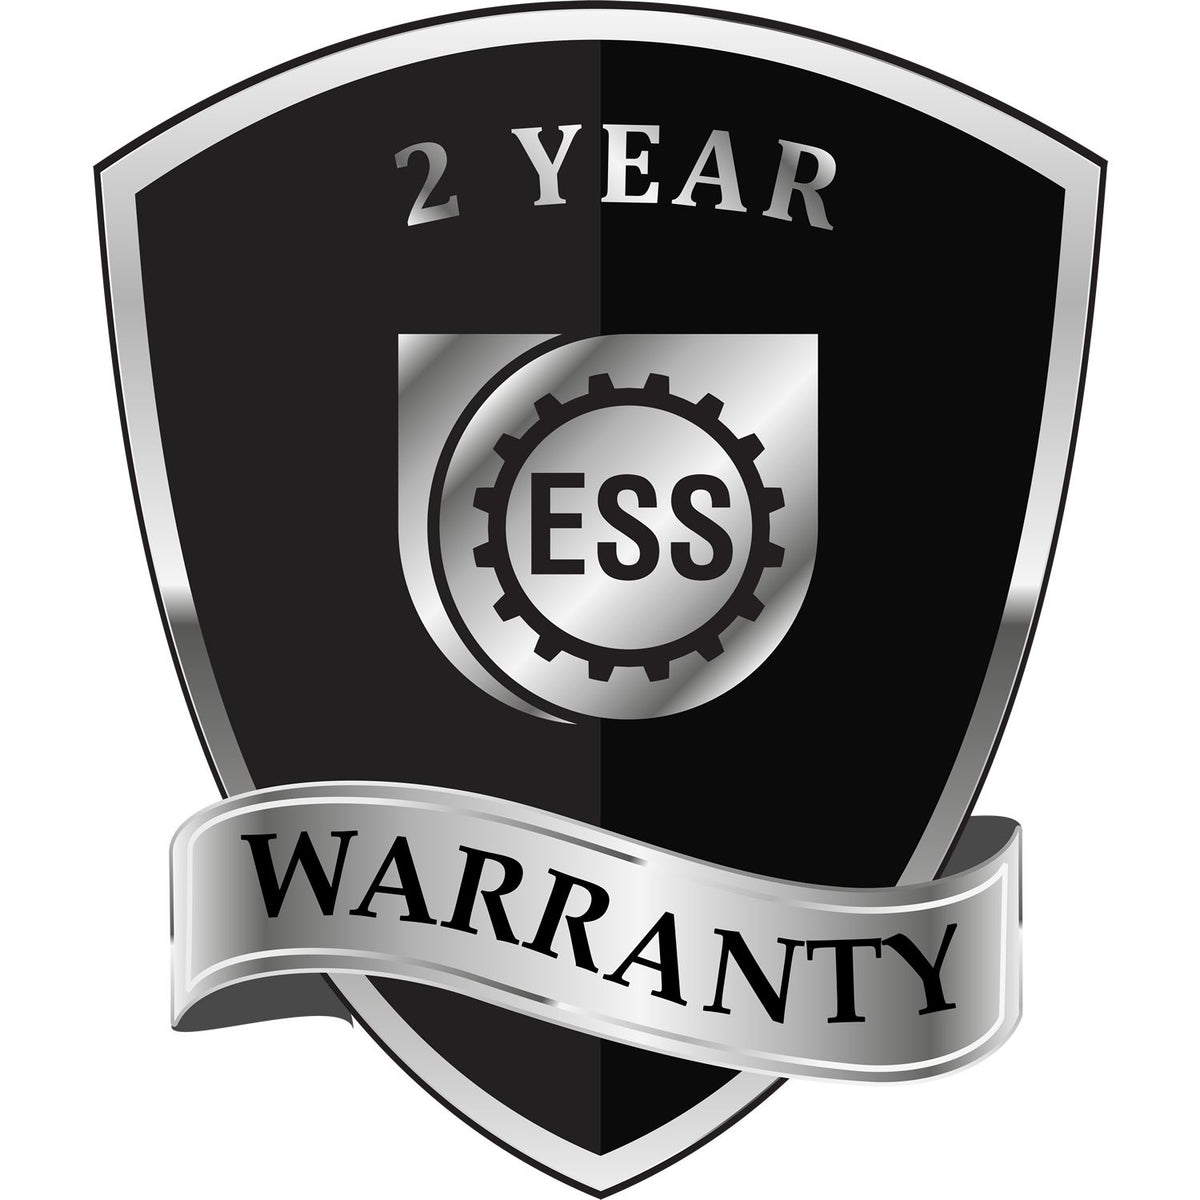 A badge or emblem showing a warranty icon for the Extended Long Reach Colorado Surveyor Embosser